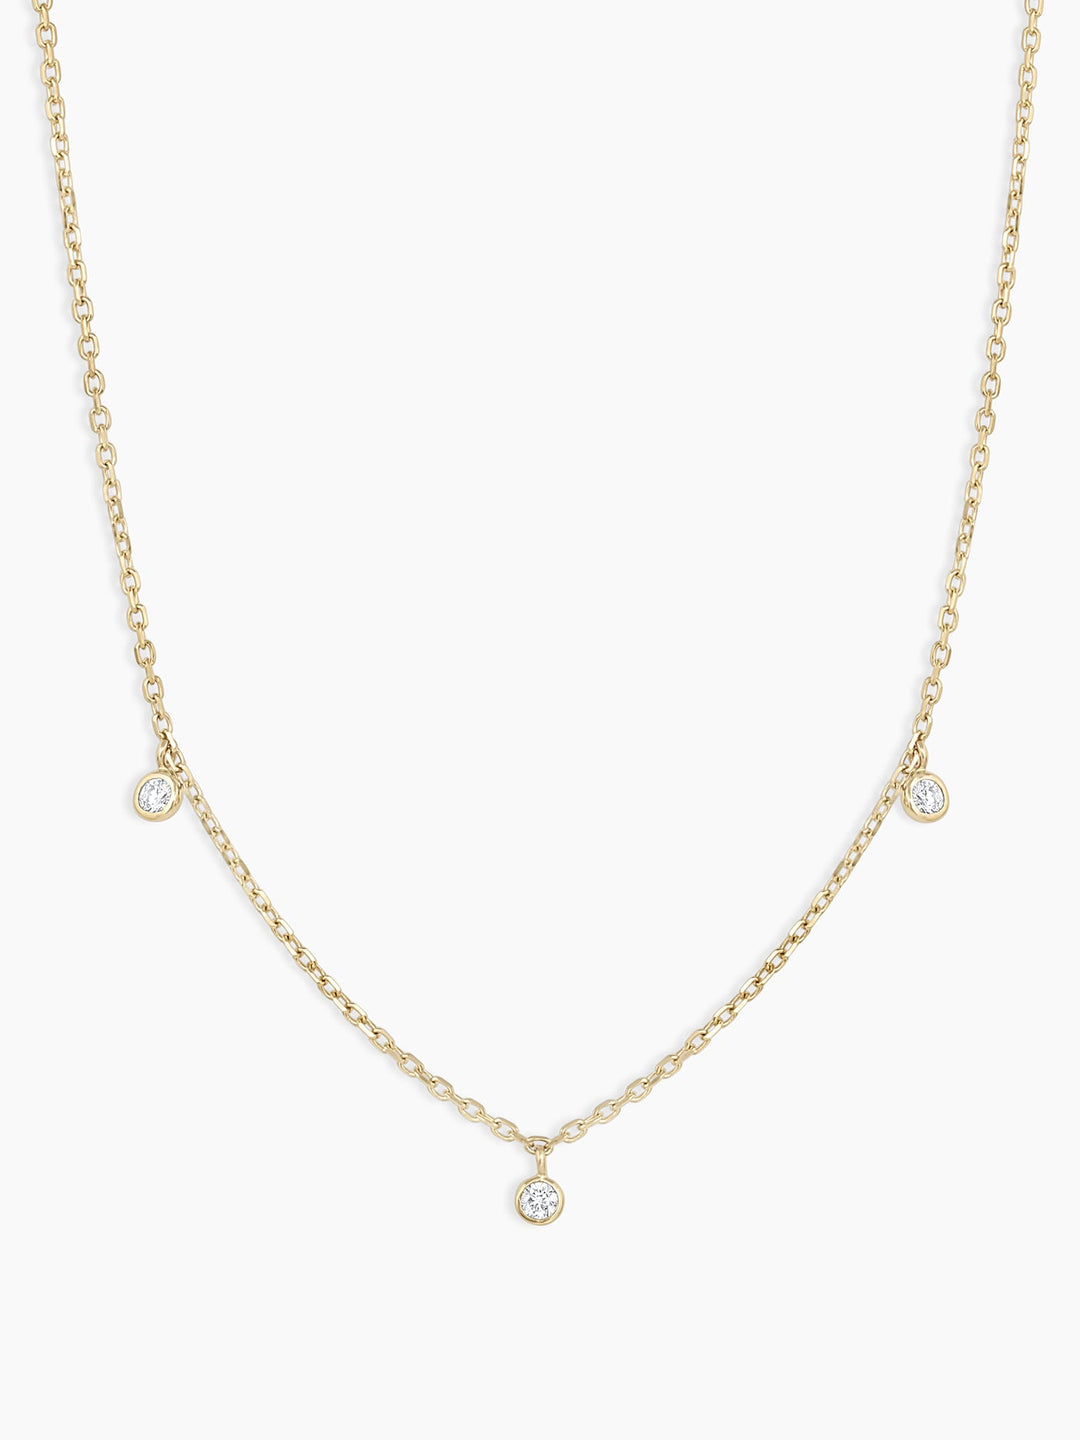 14k Gold Necklaces: Solid Gold Chains, Charms & More | gorjana